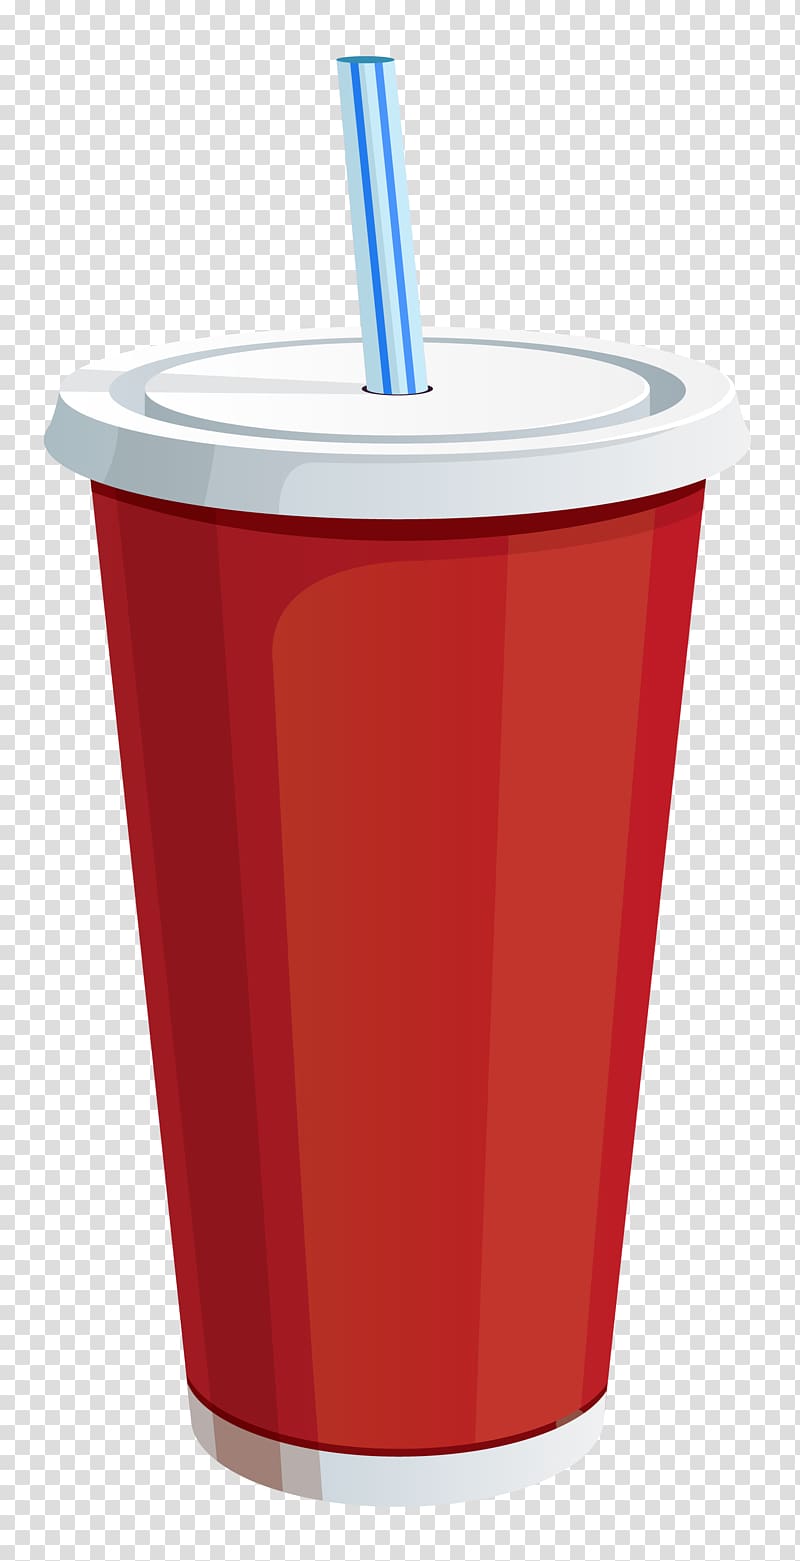 https://p7.hiclipart.com/preview/321/672/951/soft-drink-cup-clip-art-red-plastic-drink-cup-png-vector-clipart-image.jpg